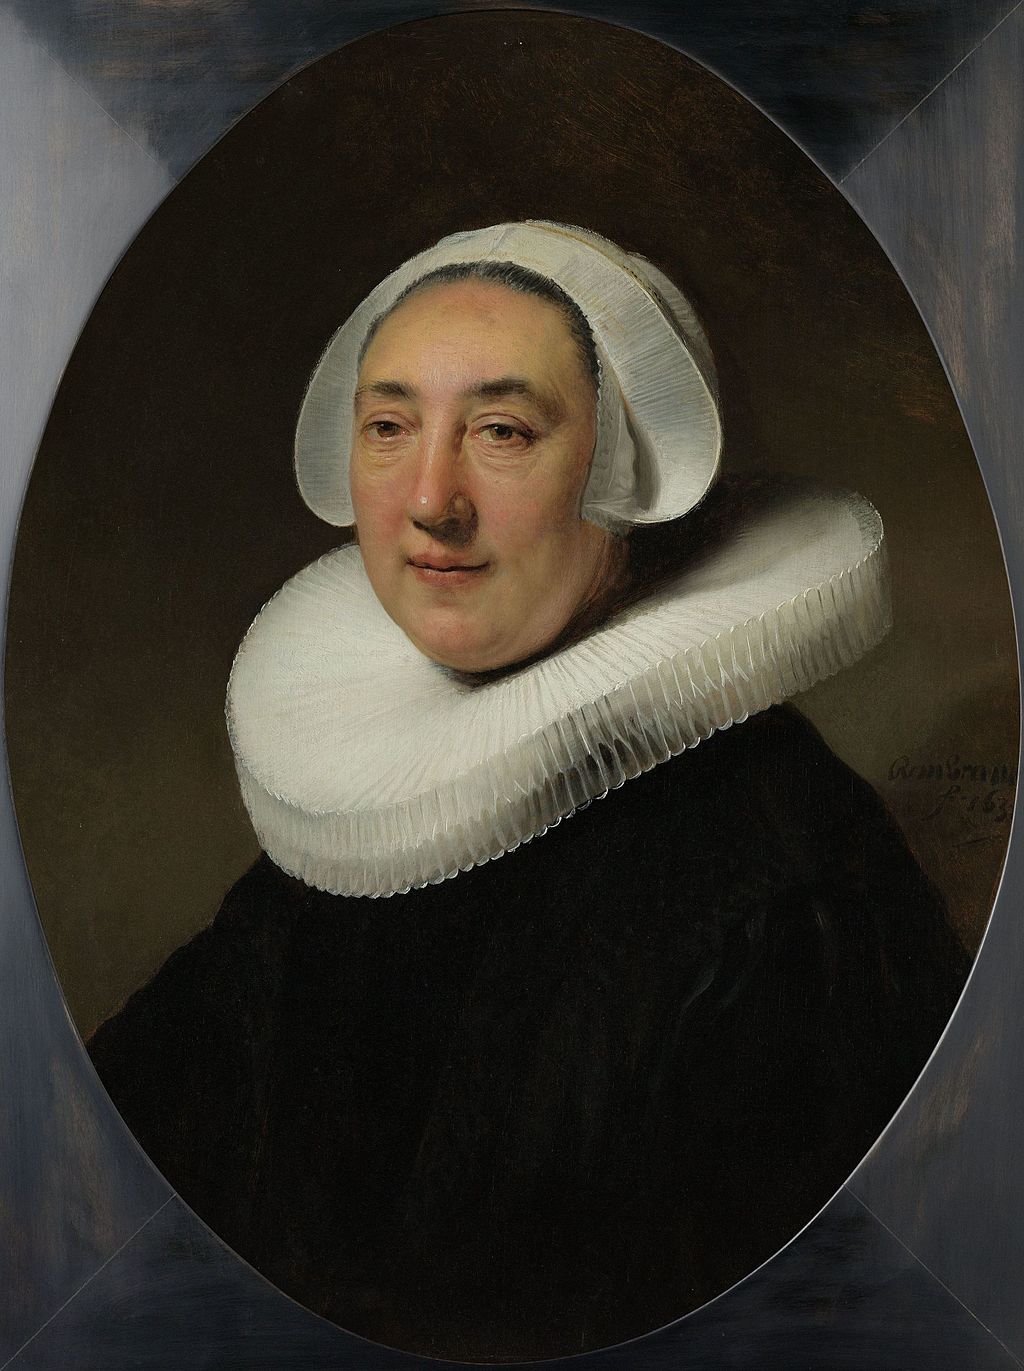 Portret of van Haesje Jacobsdr van Cleyburgh Painting by Rembrandt Oil on Canvas Reproduction by Blue Surf Art